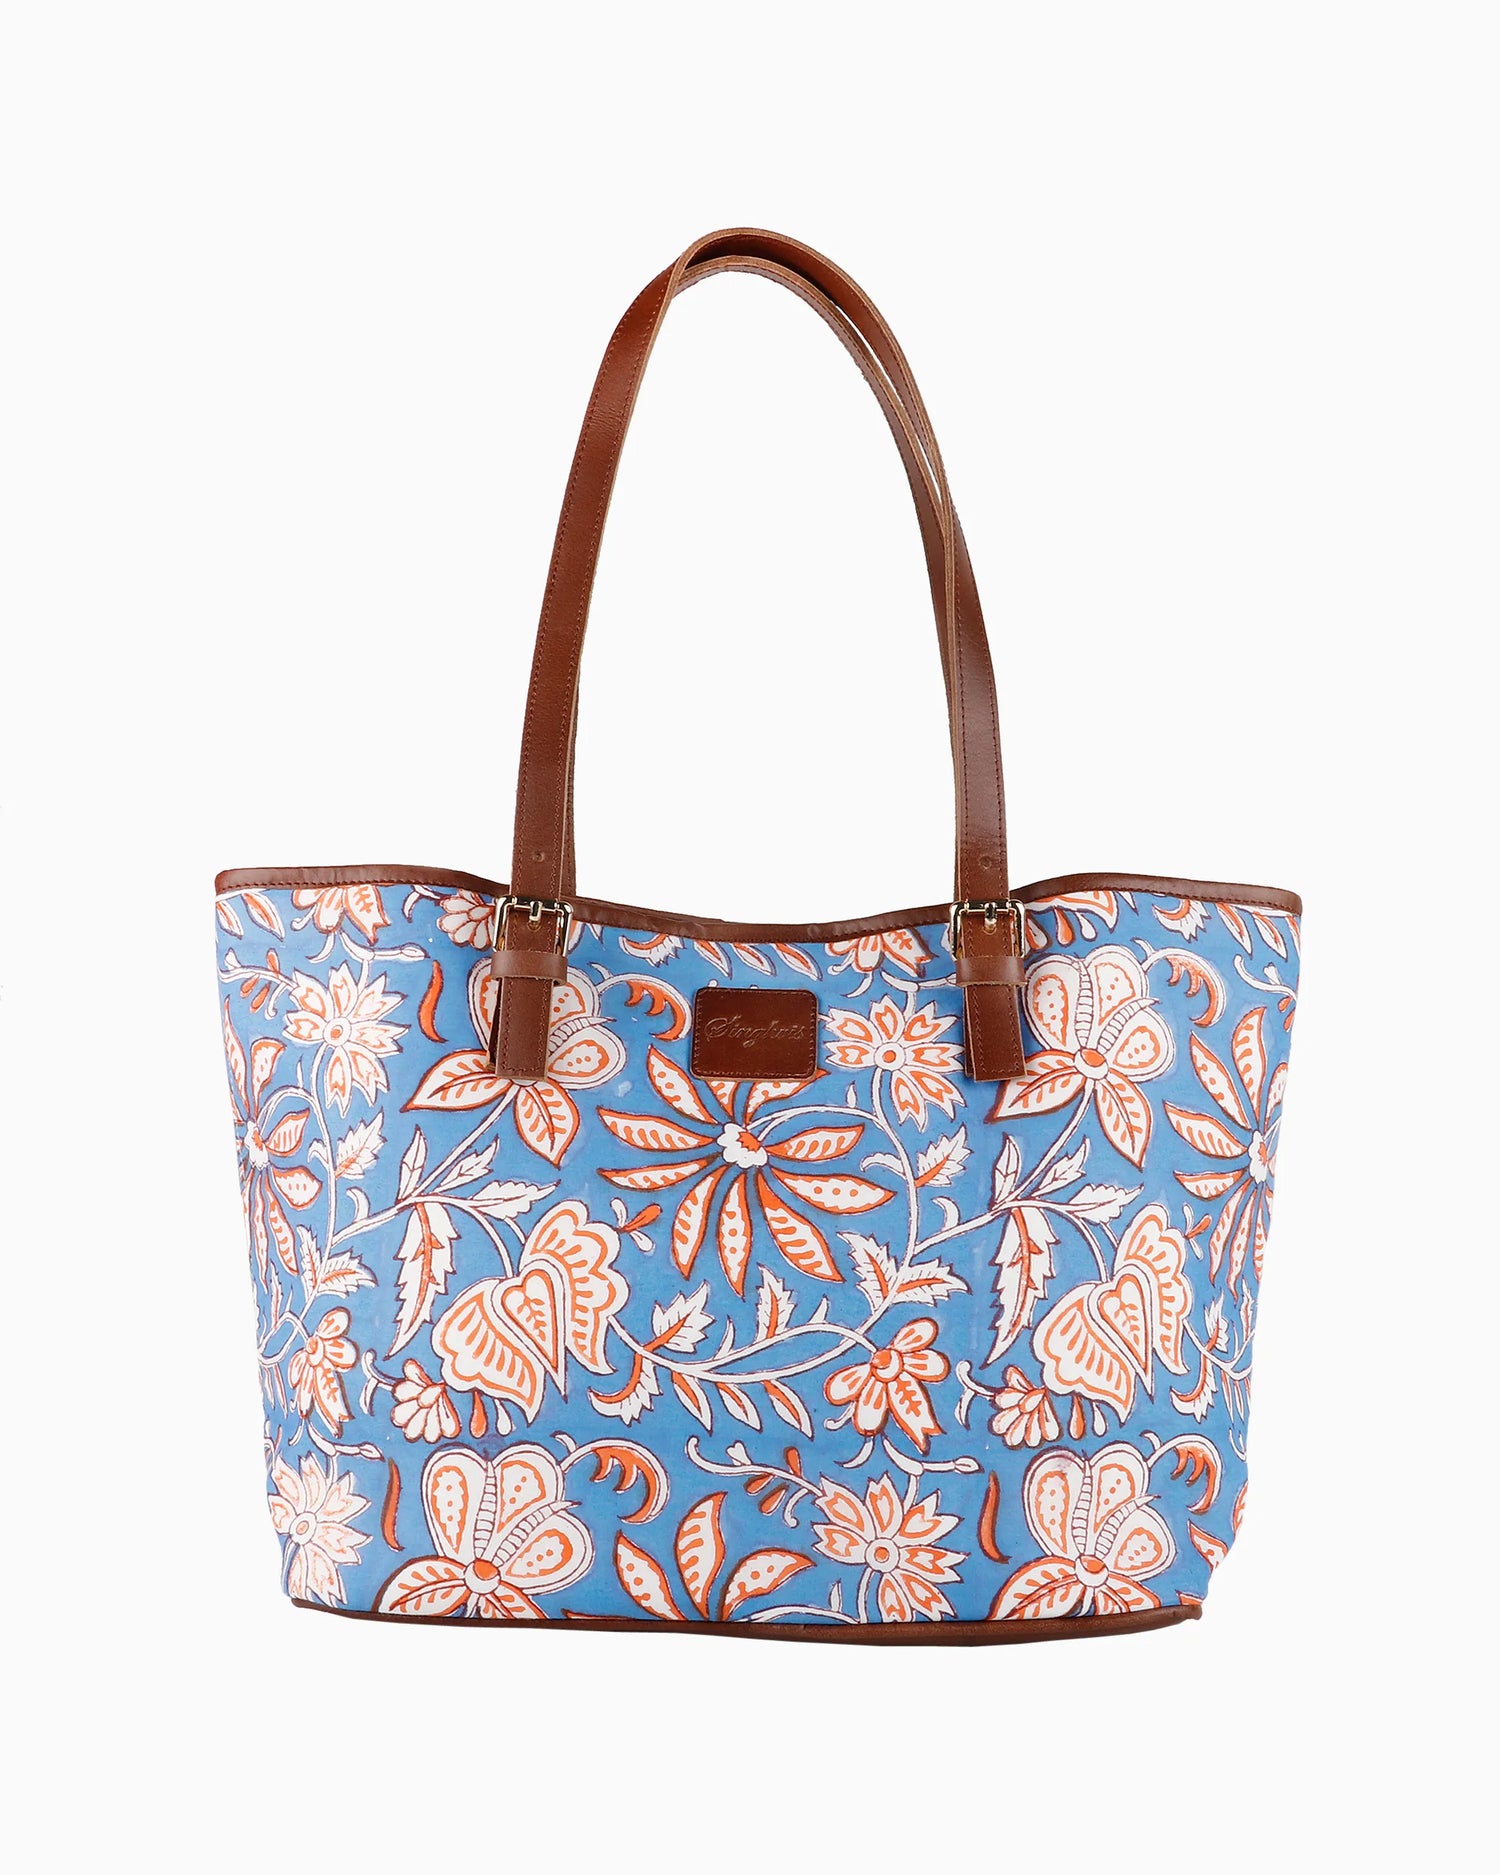 Out-Of-The-Blue Tote Bag